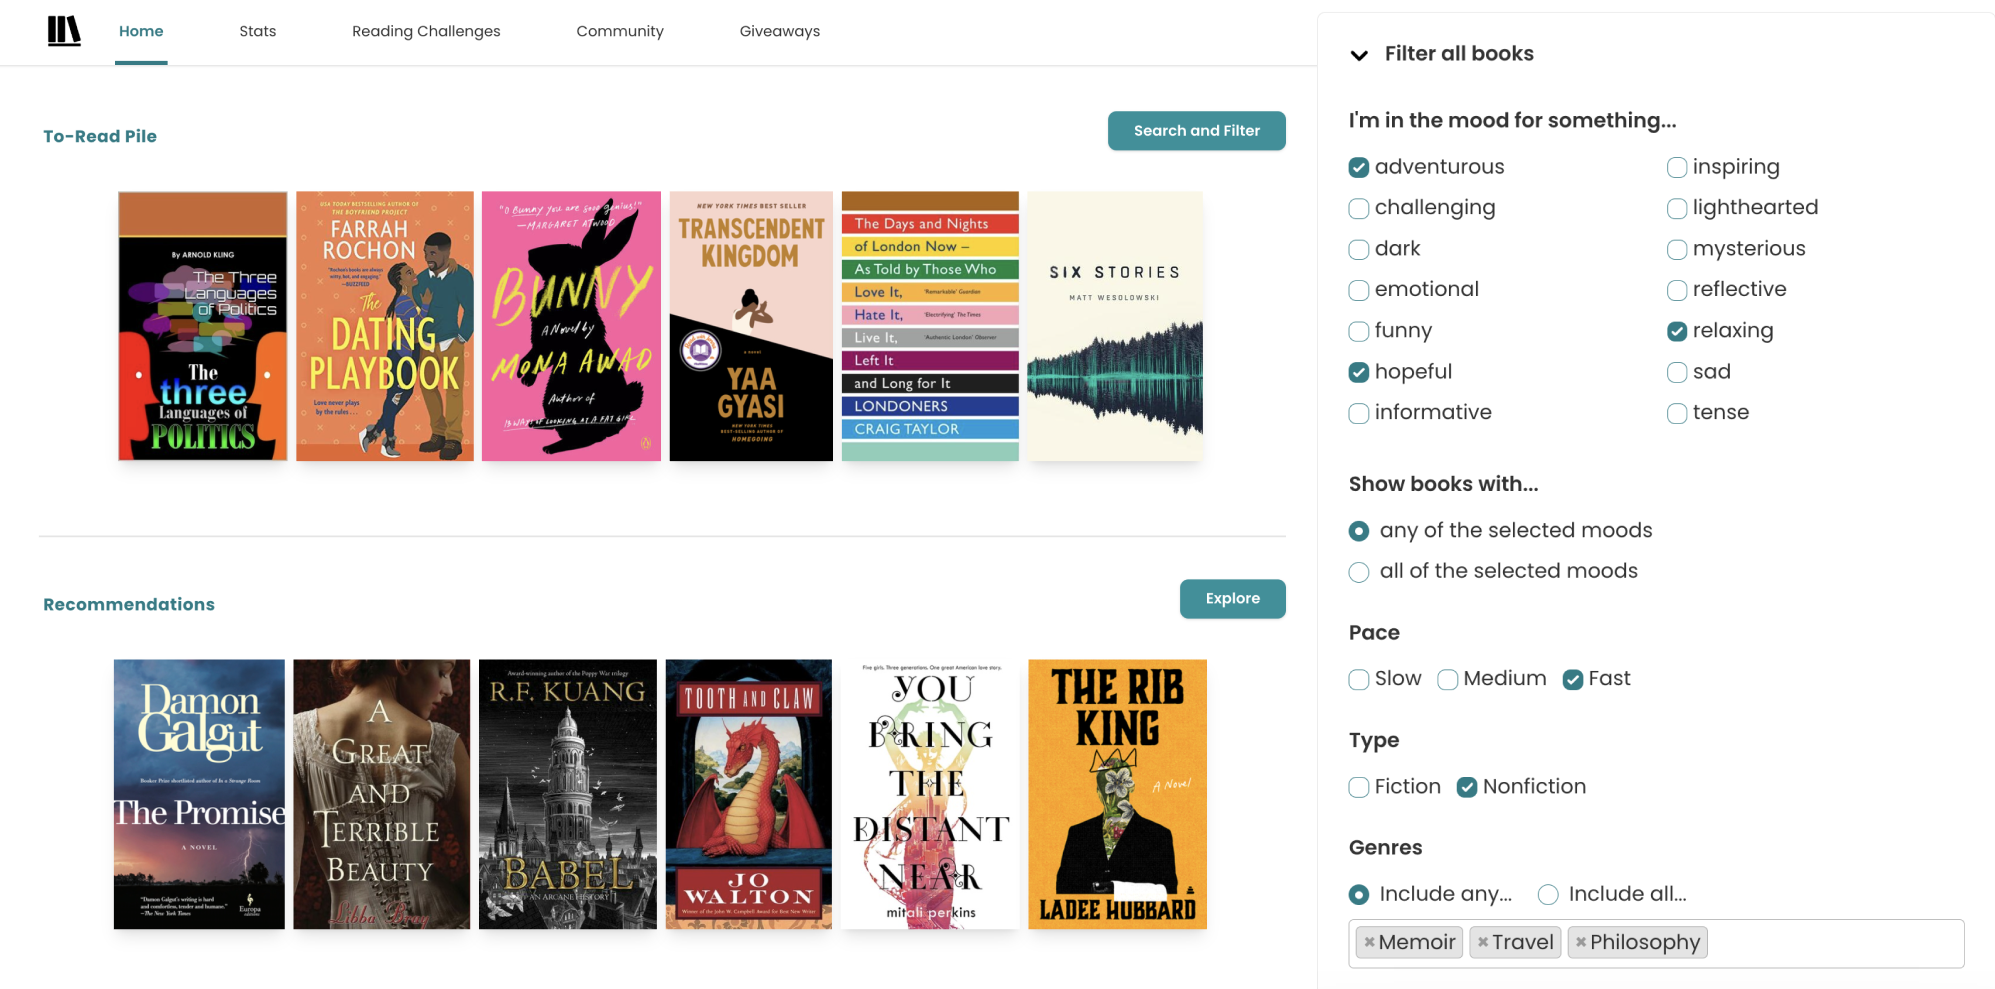 Screenshot of The StoryGraph's homepage with two rows of books covers. The top row is titled 'To-Read Pile' and the bottom row is titled 'Recommendations'. Overlayed, on the right, is the mobile view of a filter menu. There are options to select mood, pace, fiction or nonfiction, and genres.